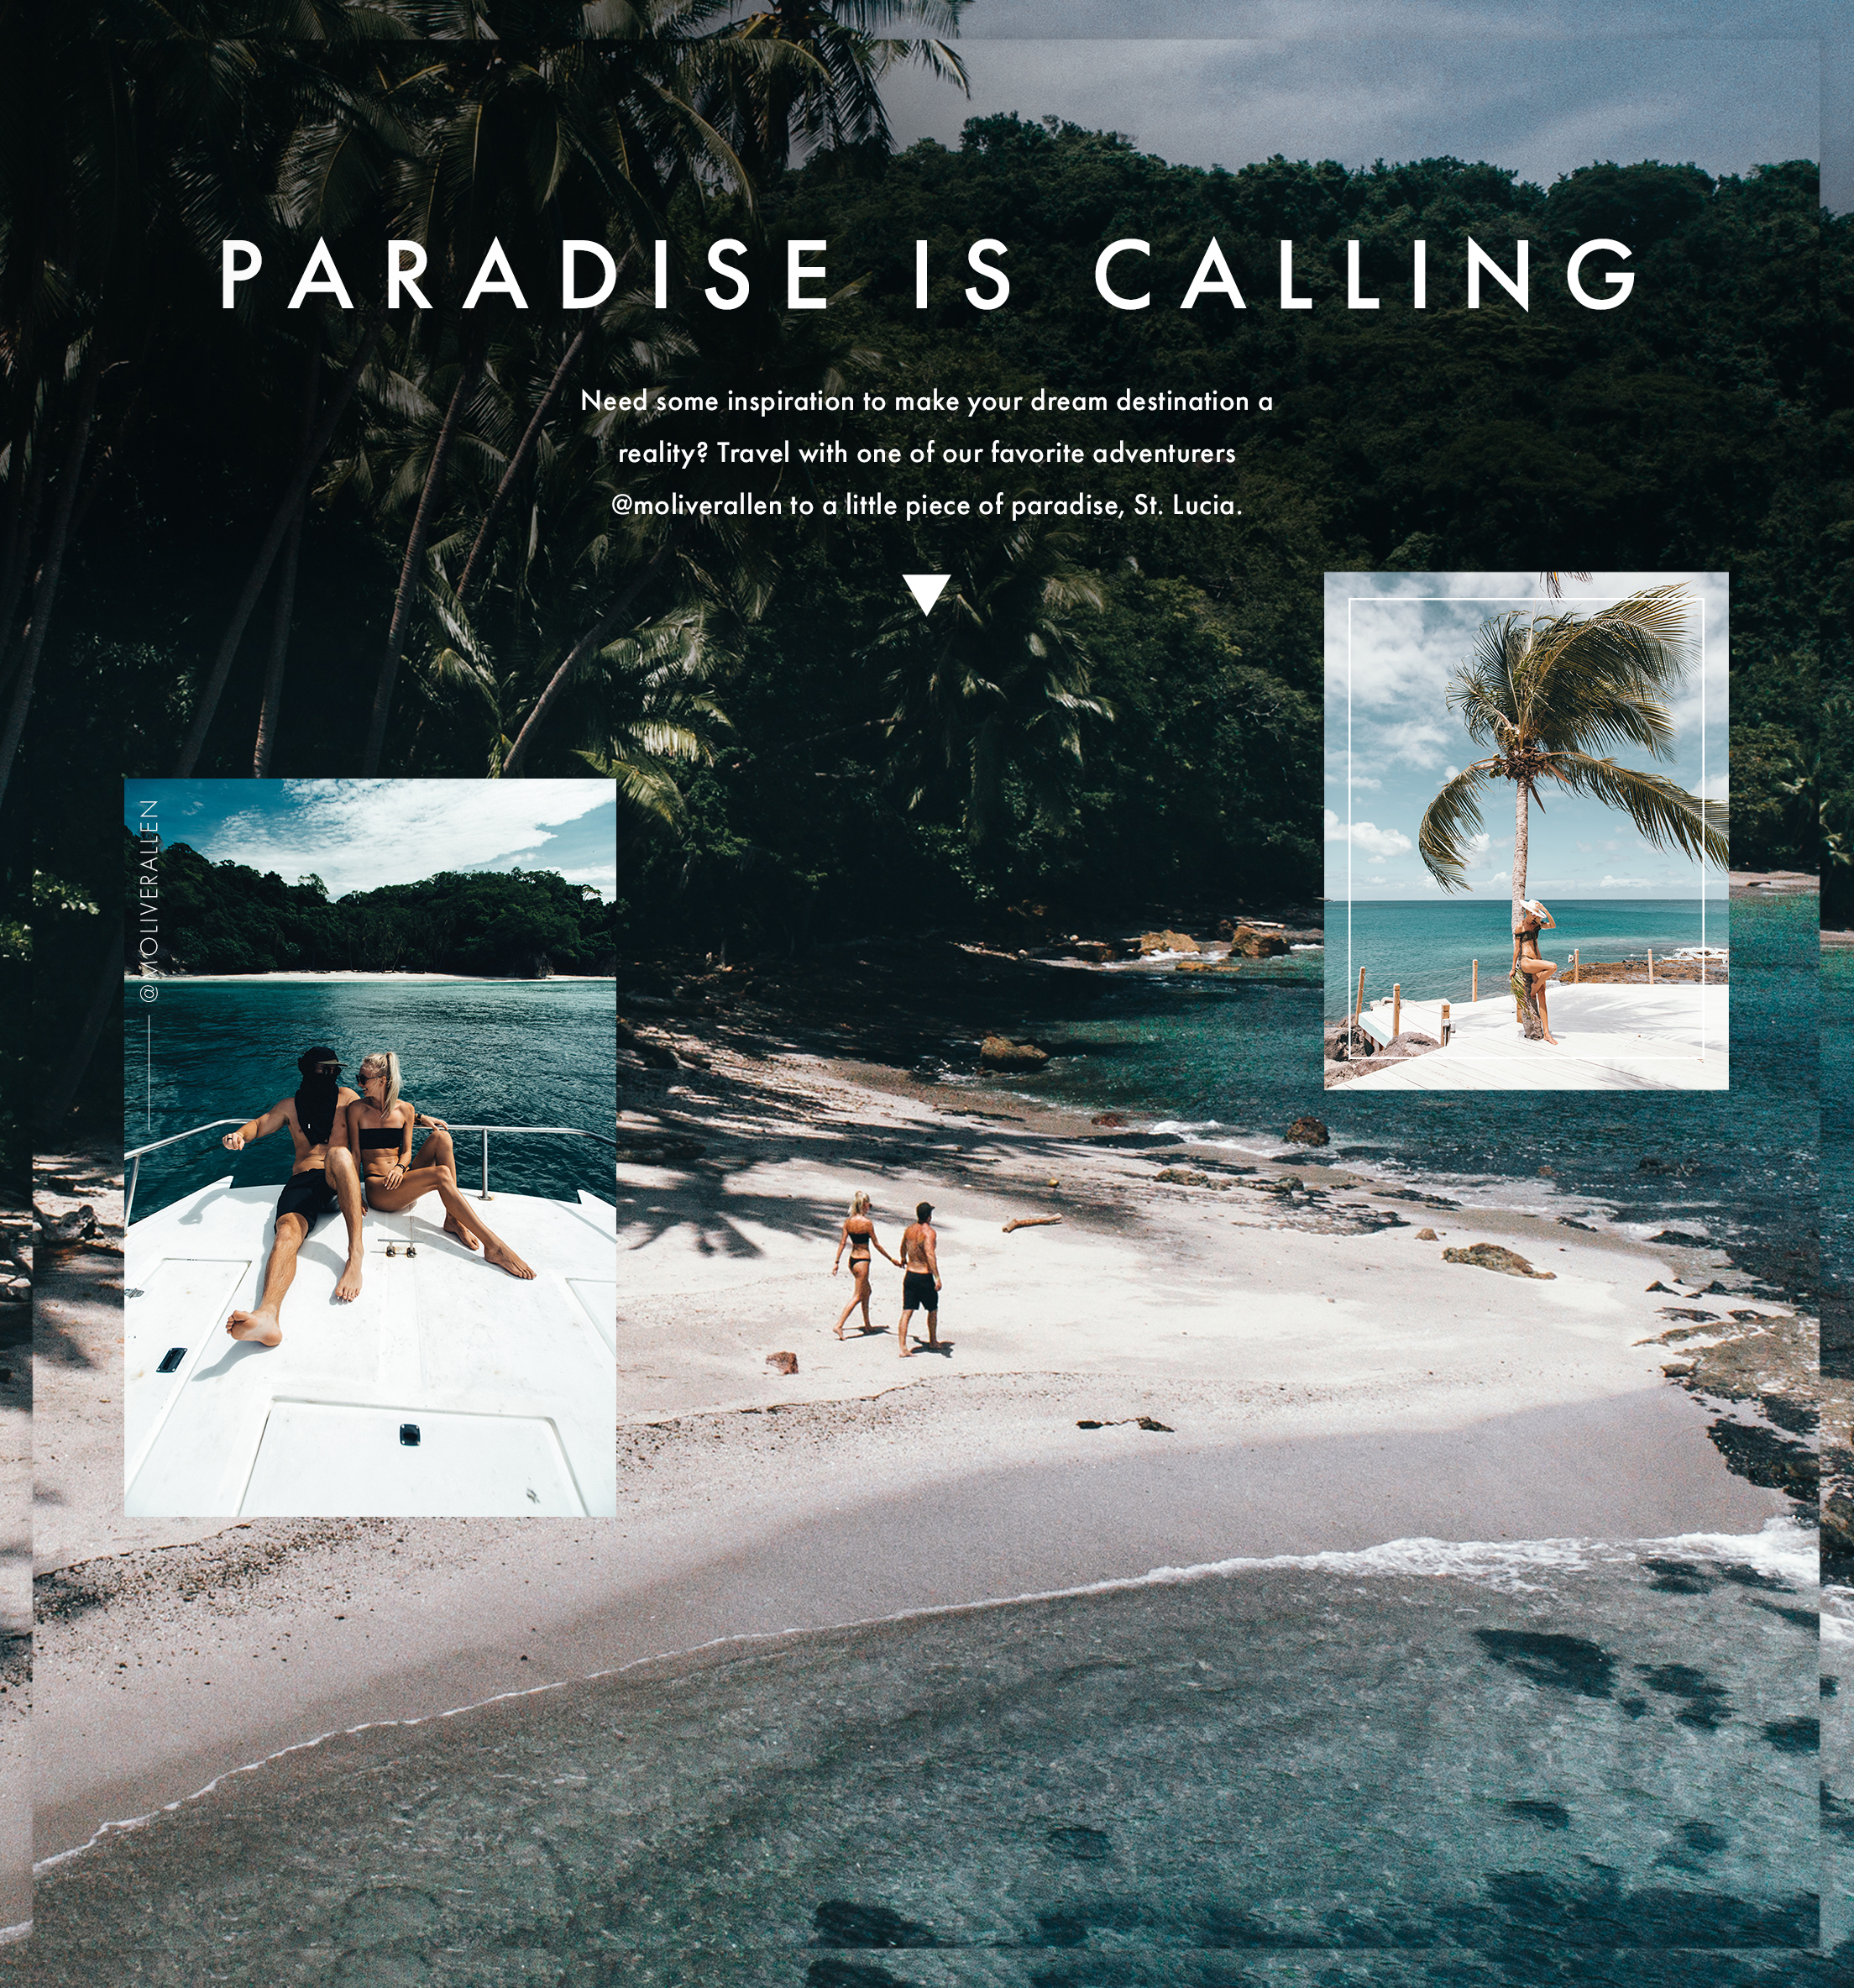 Paradise is calling. Need some inspiration to make your dream destination a reality? Travel with one of our favorite adventurers @moliverallen to a little piece of paradise, St. Lucia.